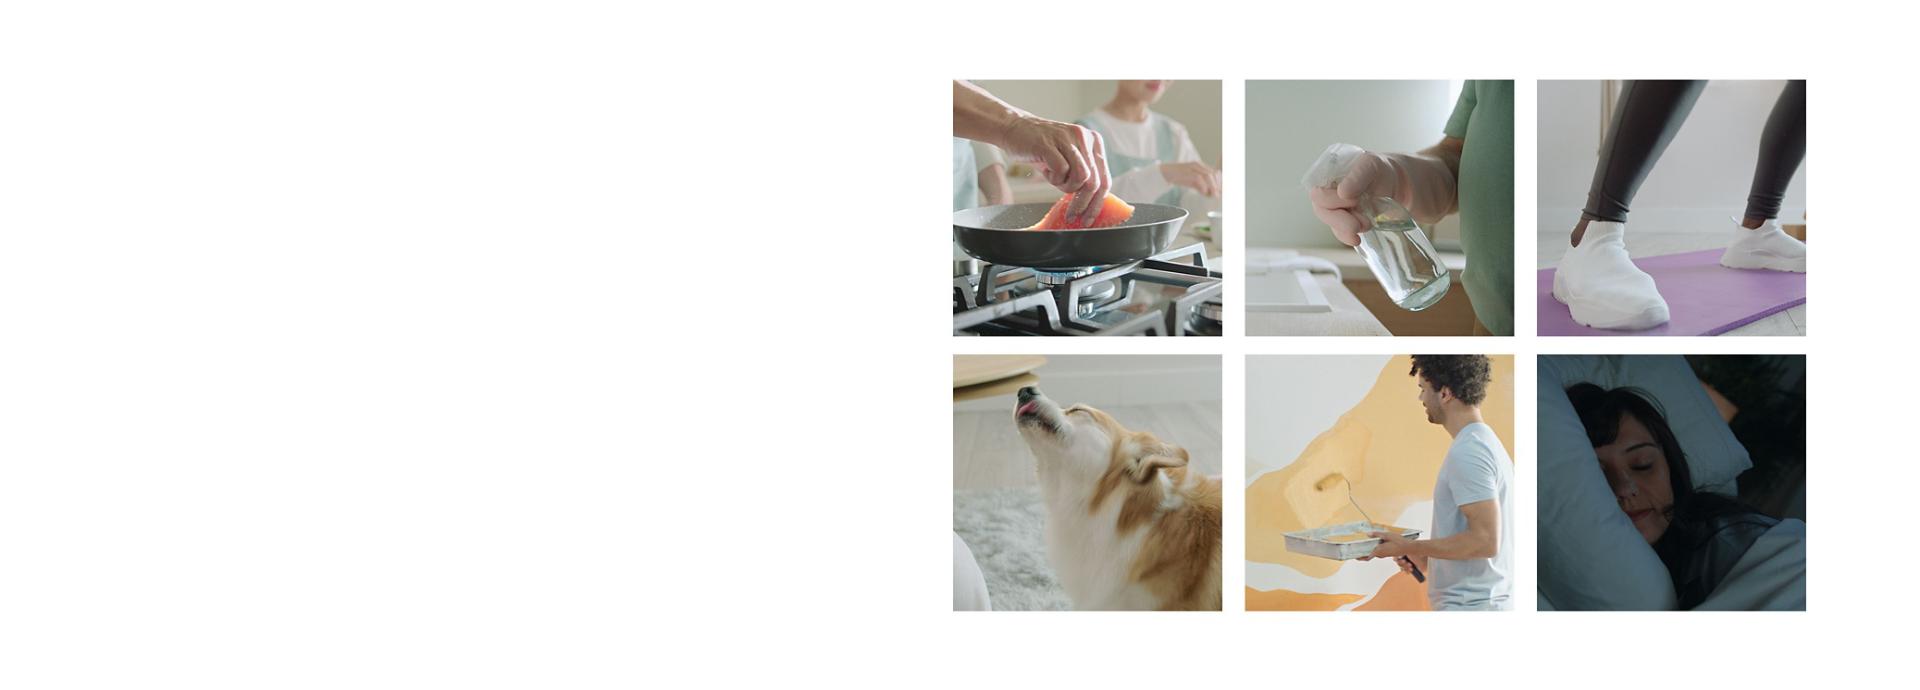 A lifestyle image with 6 moments captured. The moments include a person cooking, a person spraying water, a person exercising, a dog, a person painting and a person sleeping.